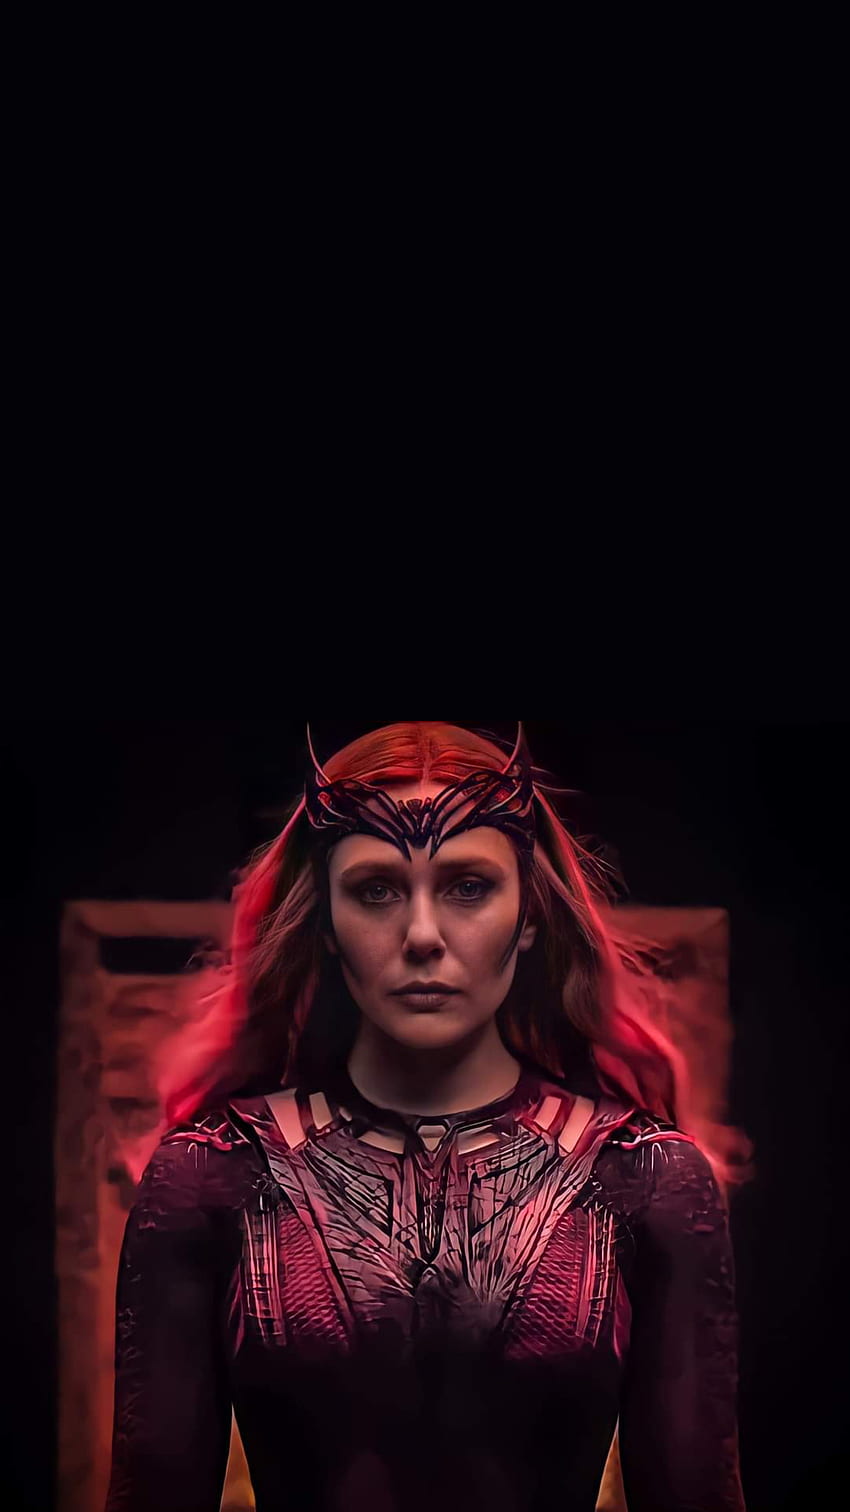 Download wallpaper 840x1336 the scarlet witch wanda vision 2021 fan art  iphone 5 iphone 5s iphone 5c ipod touch 840x1336 hd background 26969